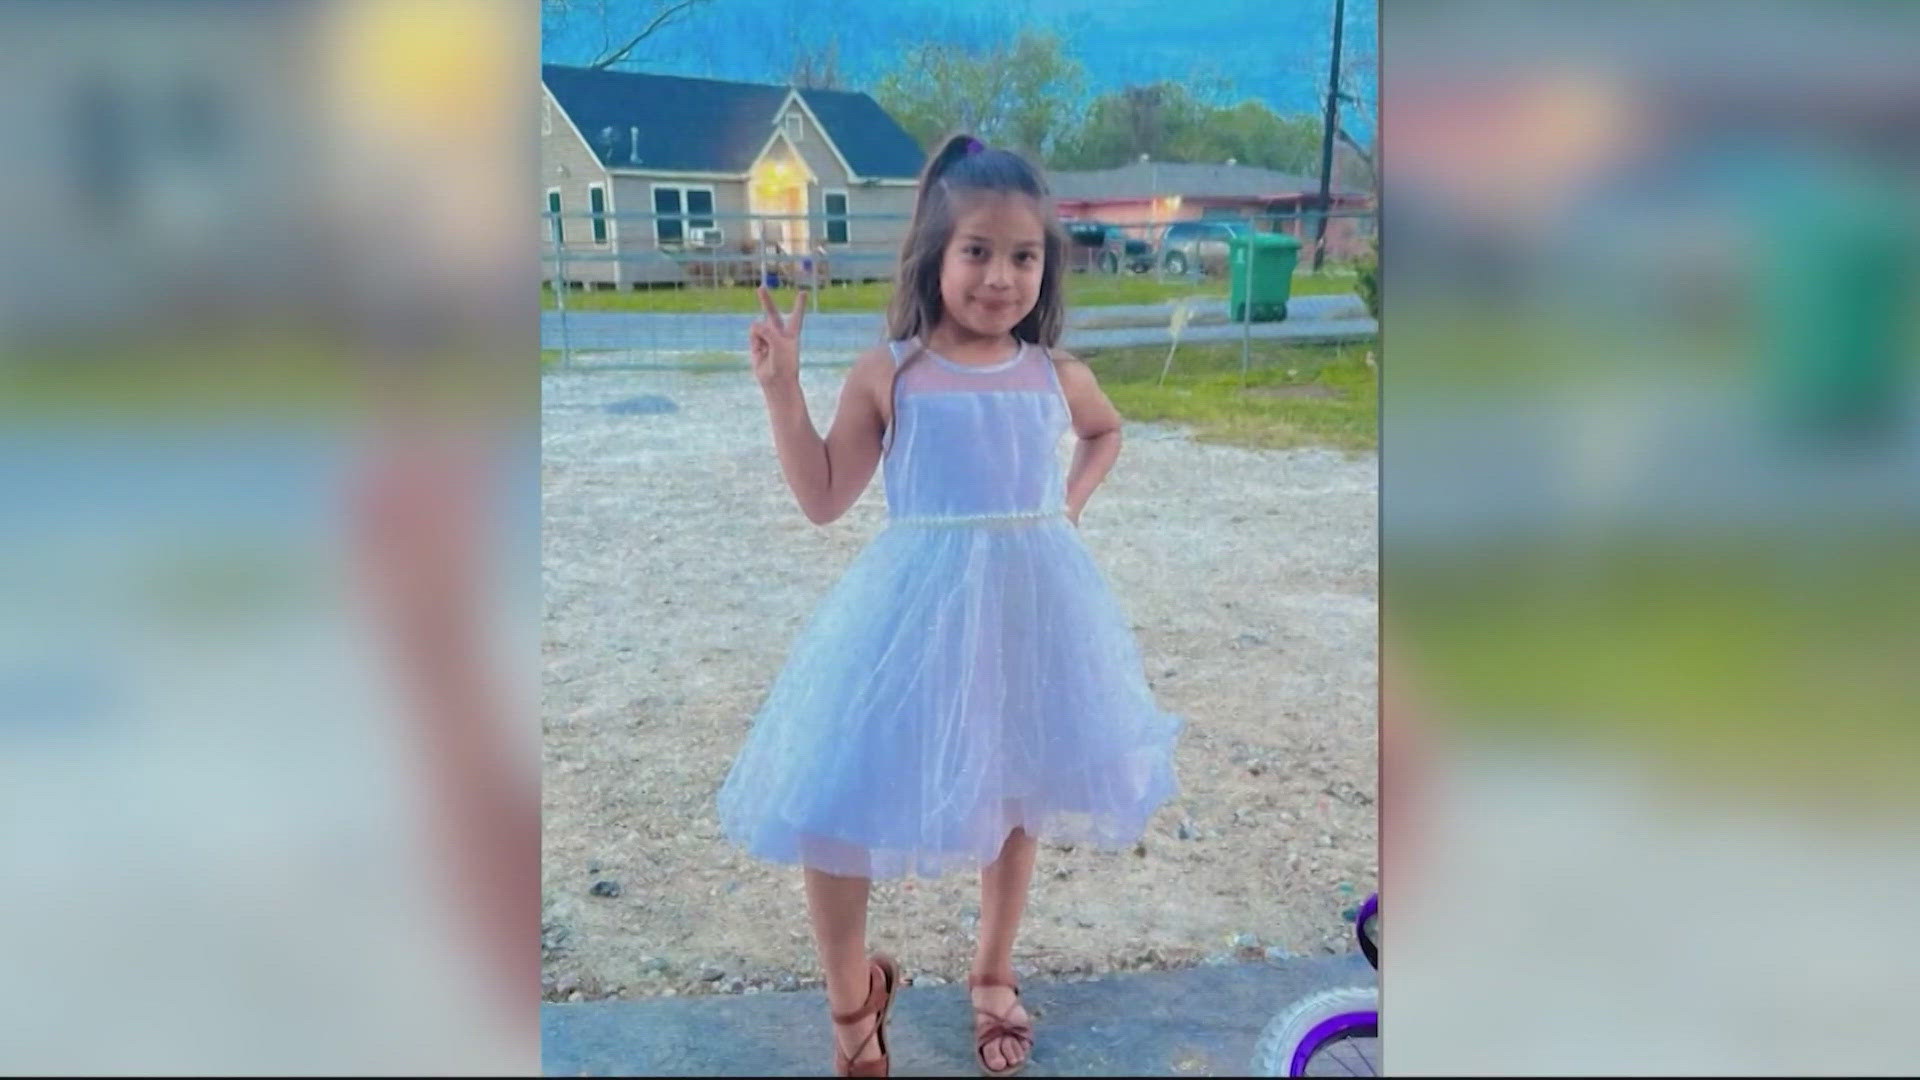 A management company for a northwest Houston hotel has responded to a lawsuit in the death of an 8-year-old girl.